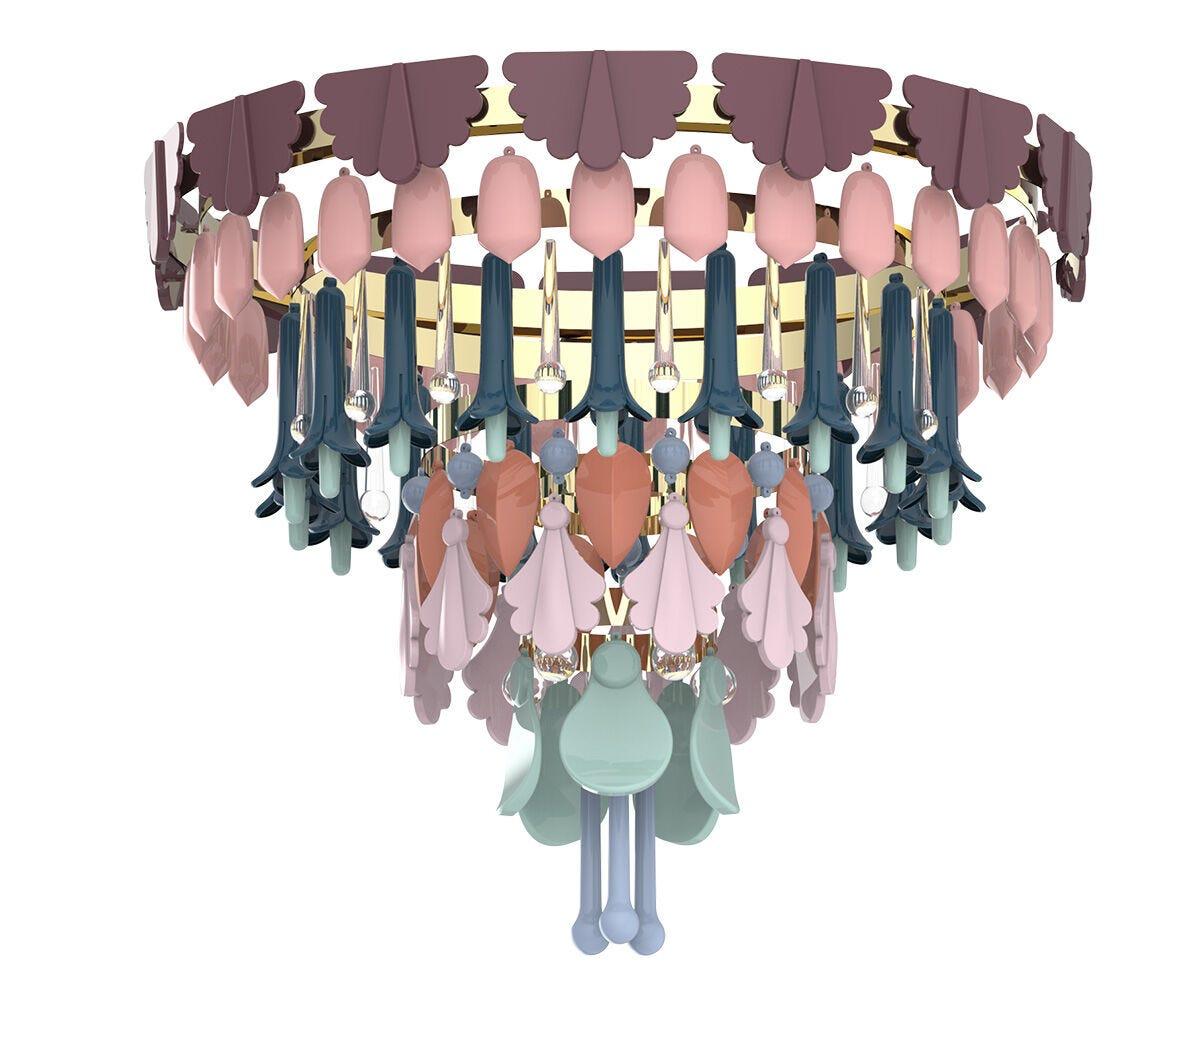 Chandelier from the Seasons collection, inspired by the Art Decó style and nature.

The Seasons collection combines the unmistakable stamp of Art Decó with the wealth of colors and forms of the different seasons of the year. A masterful treatment of